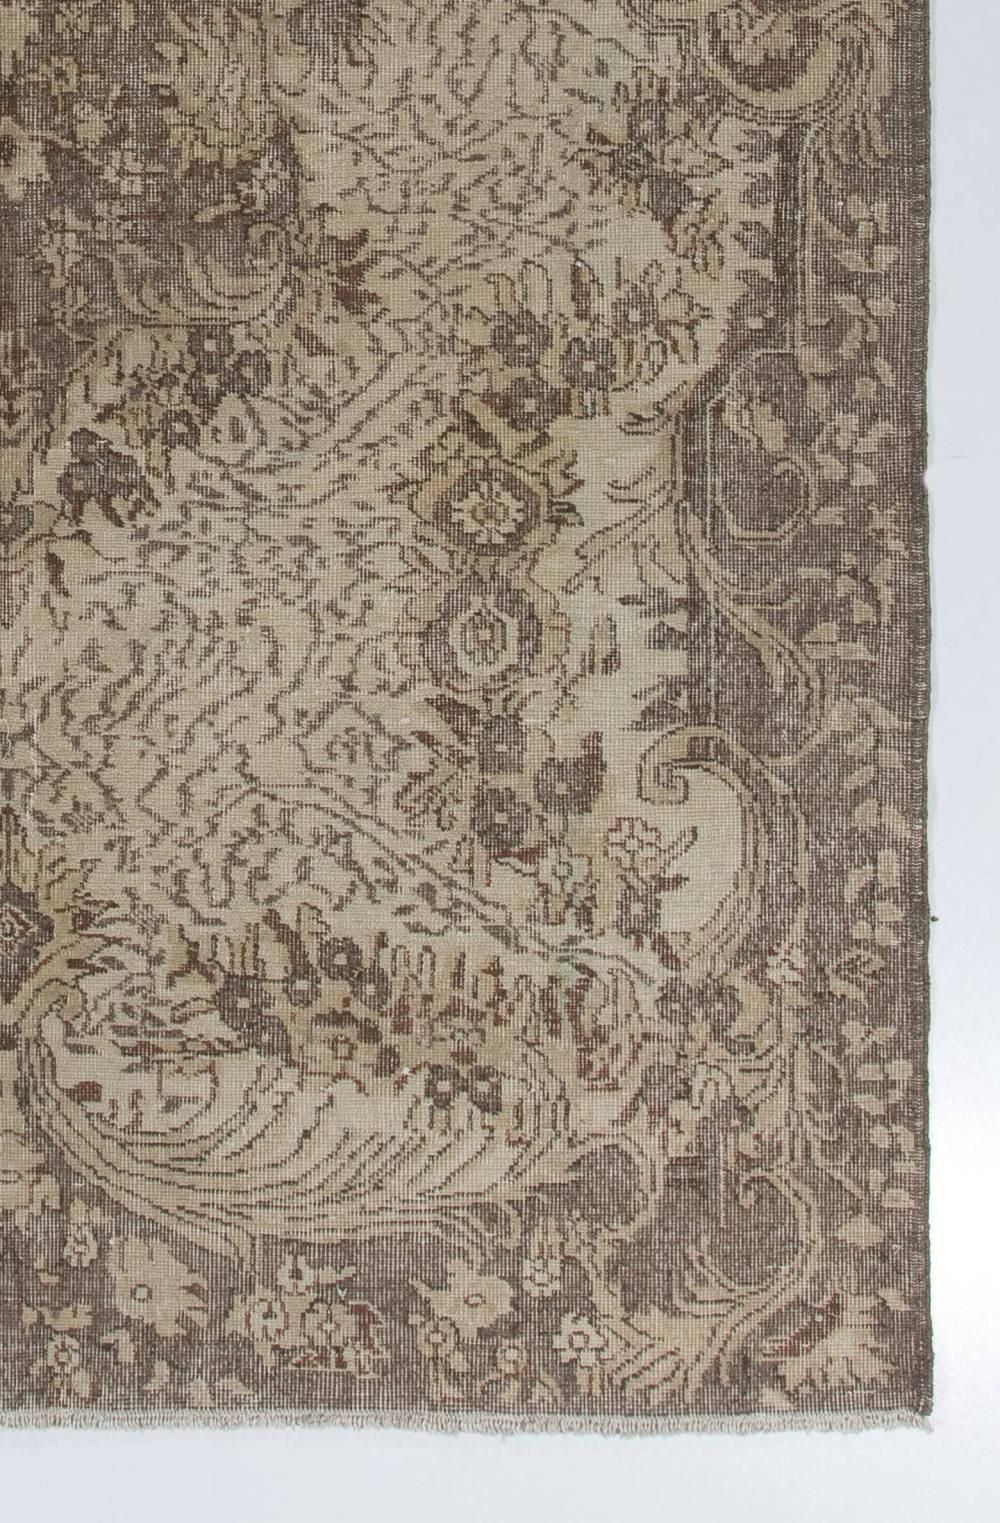 Hand-Knotted 6.5x10 Ft Vintage Handmade Anatolian Wool Area Rug in Taupe and Beige For Sale